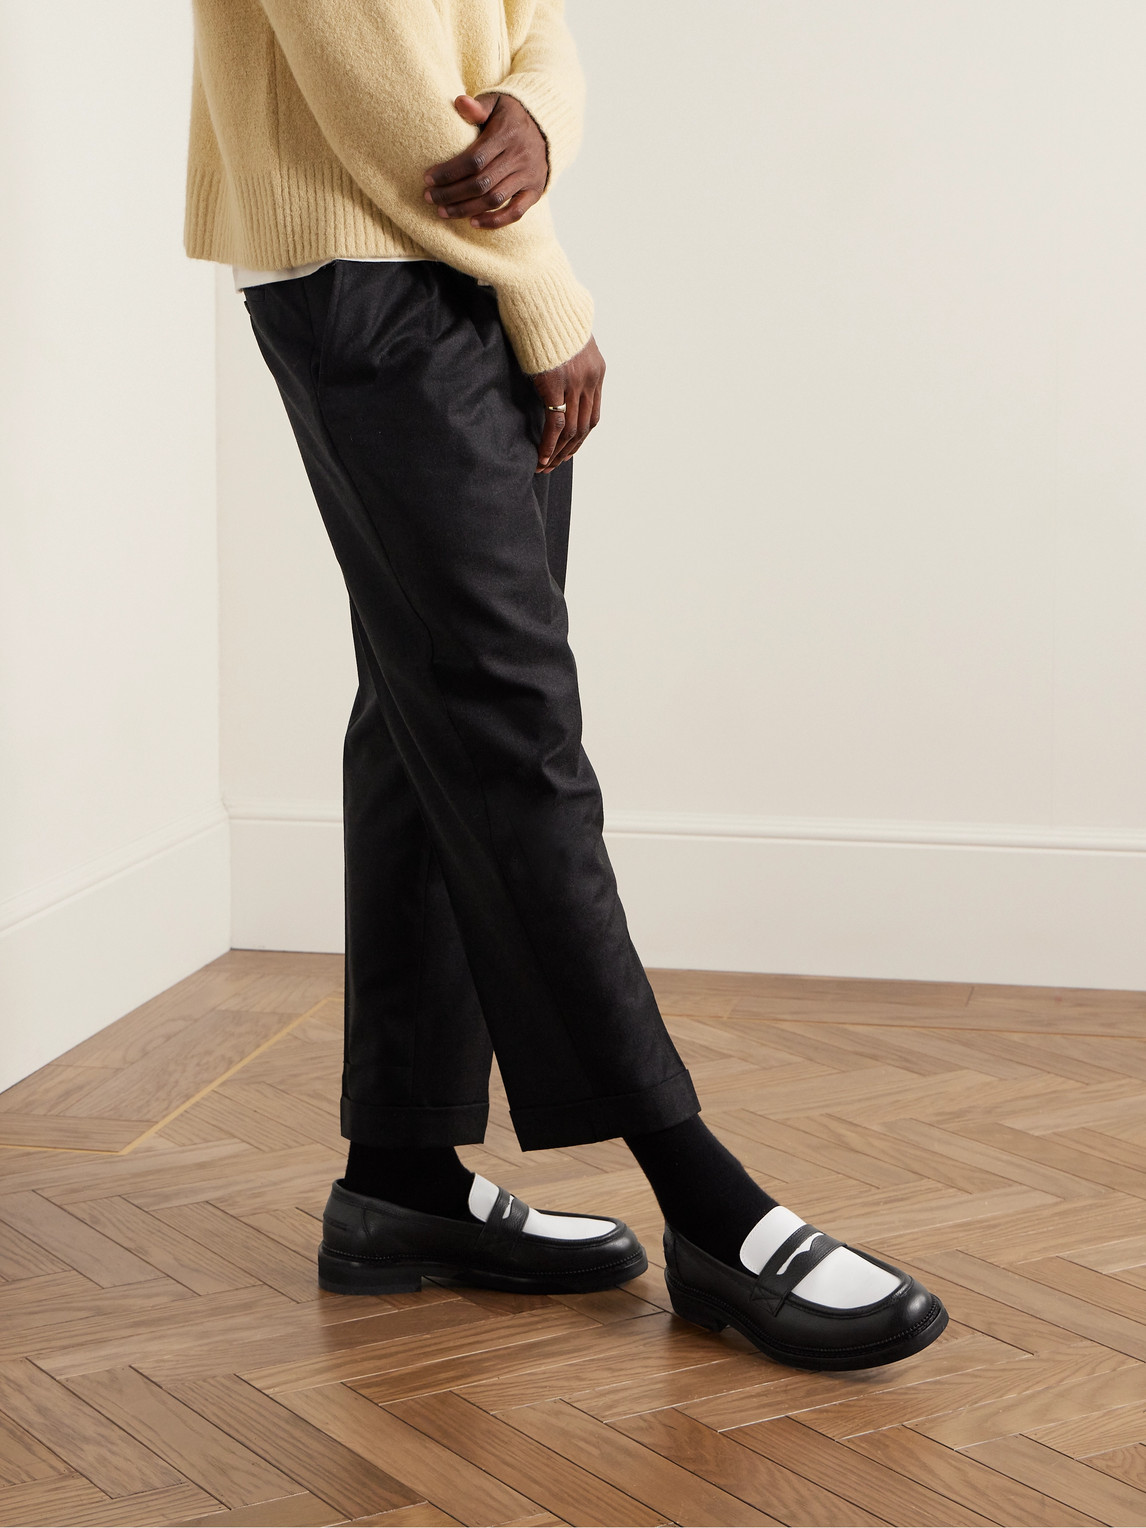 Shop Mr P Jacques Two-tone Leather Penny Loafers In Black